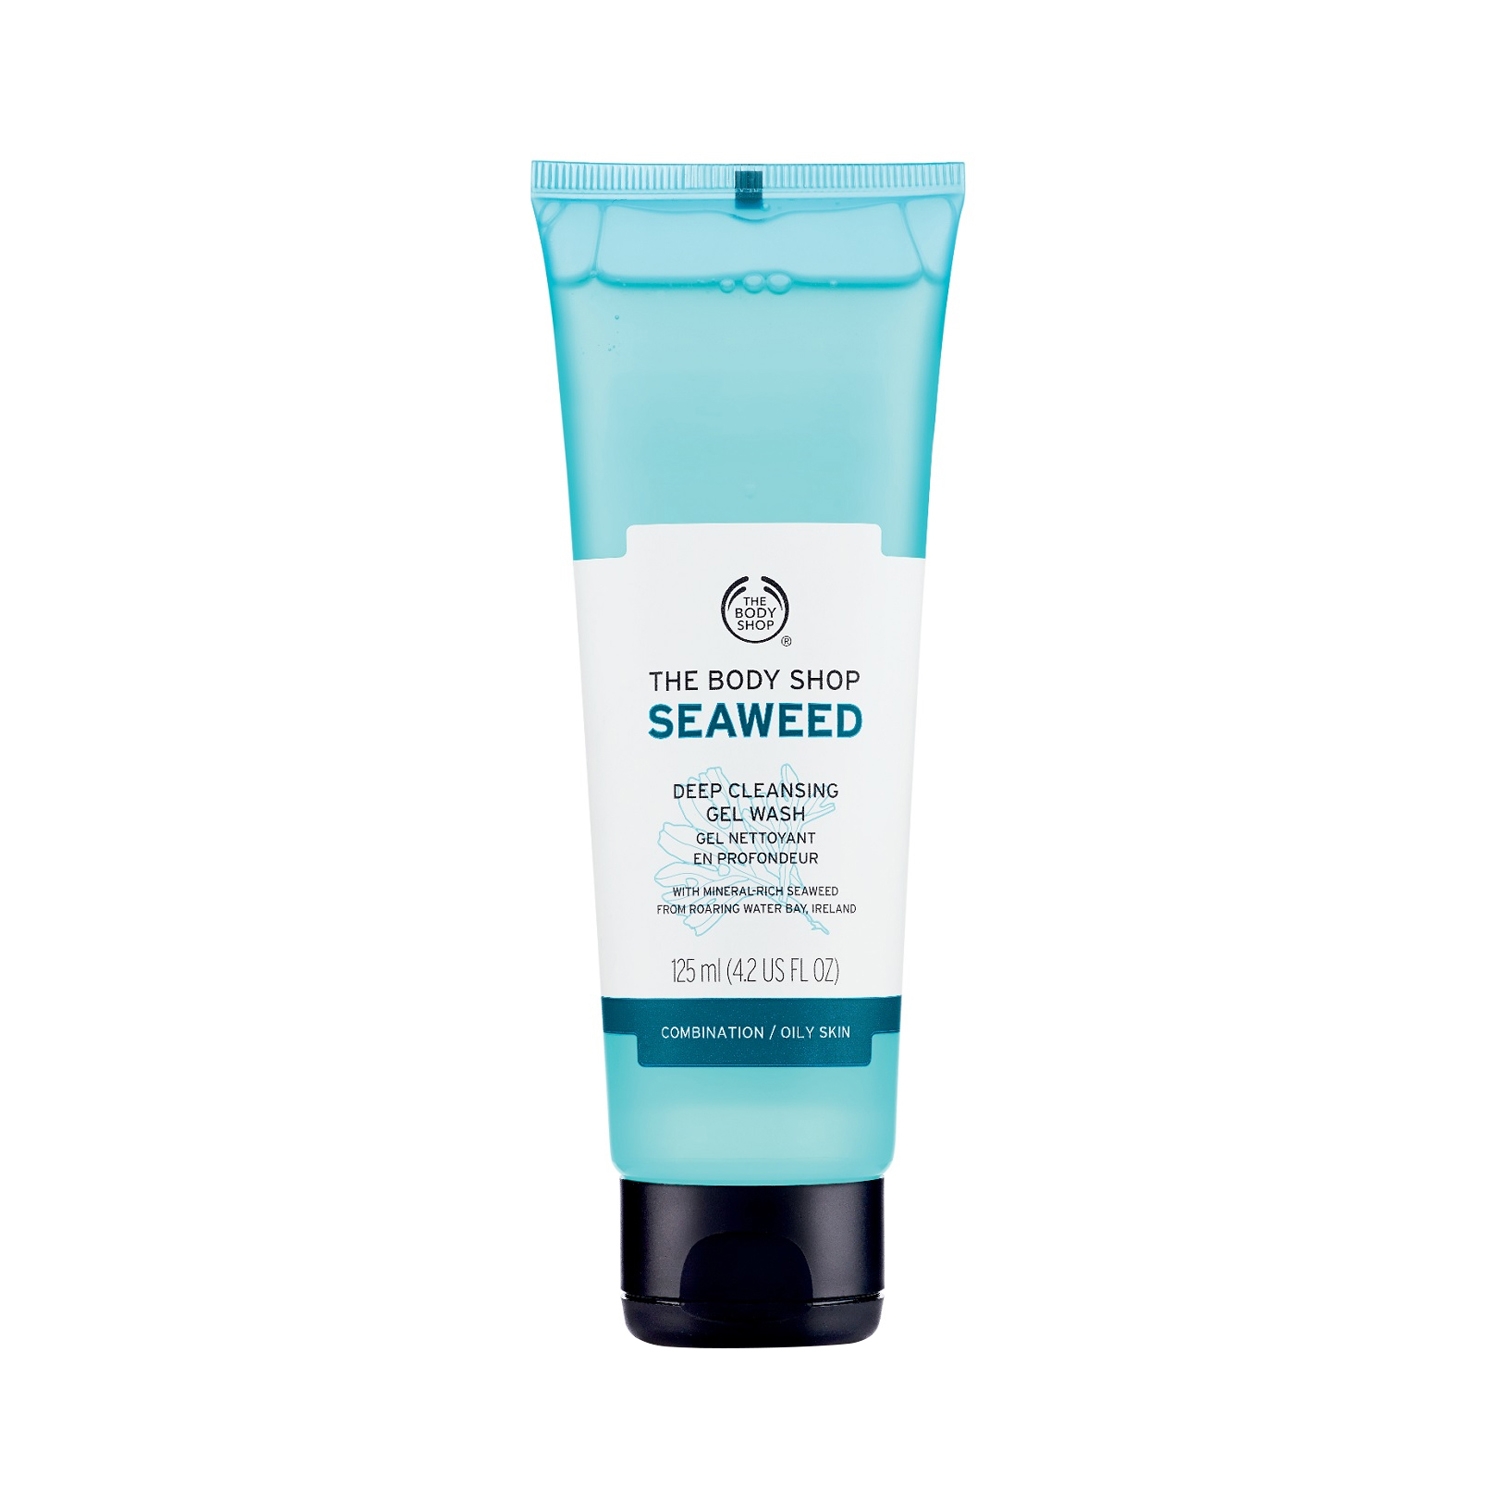 The Body Shop | The Body Shop Seaweed Cleansing Facial Wash (125ml)